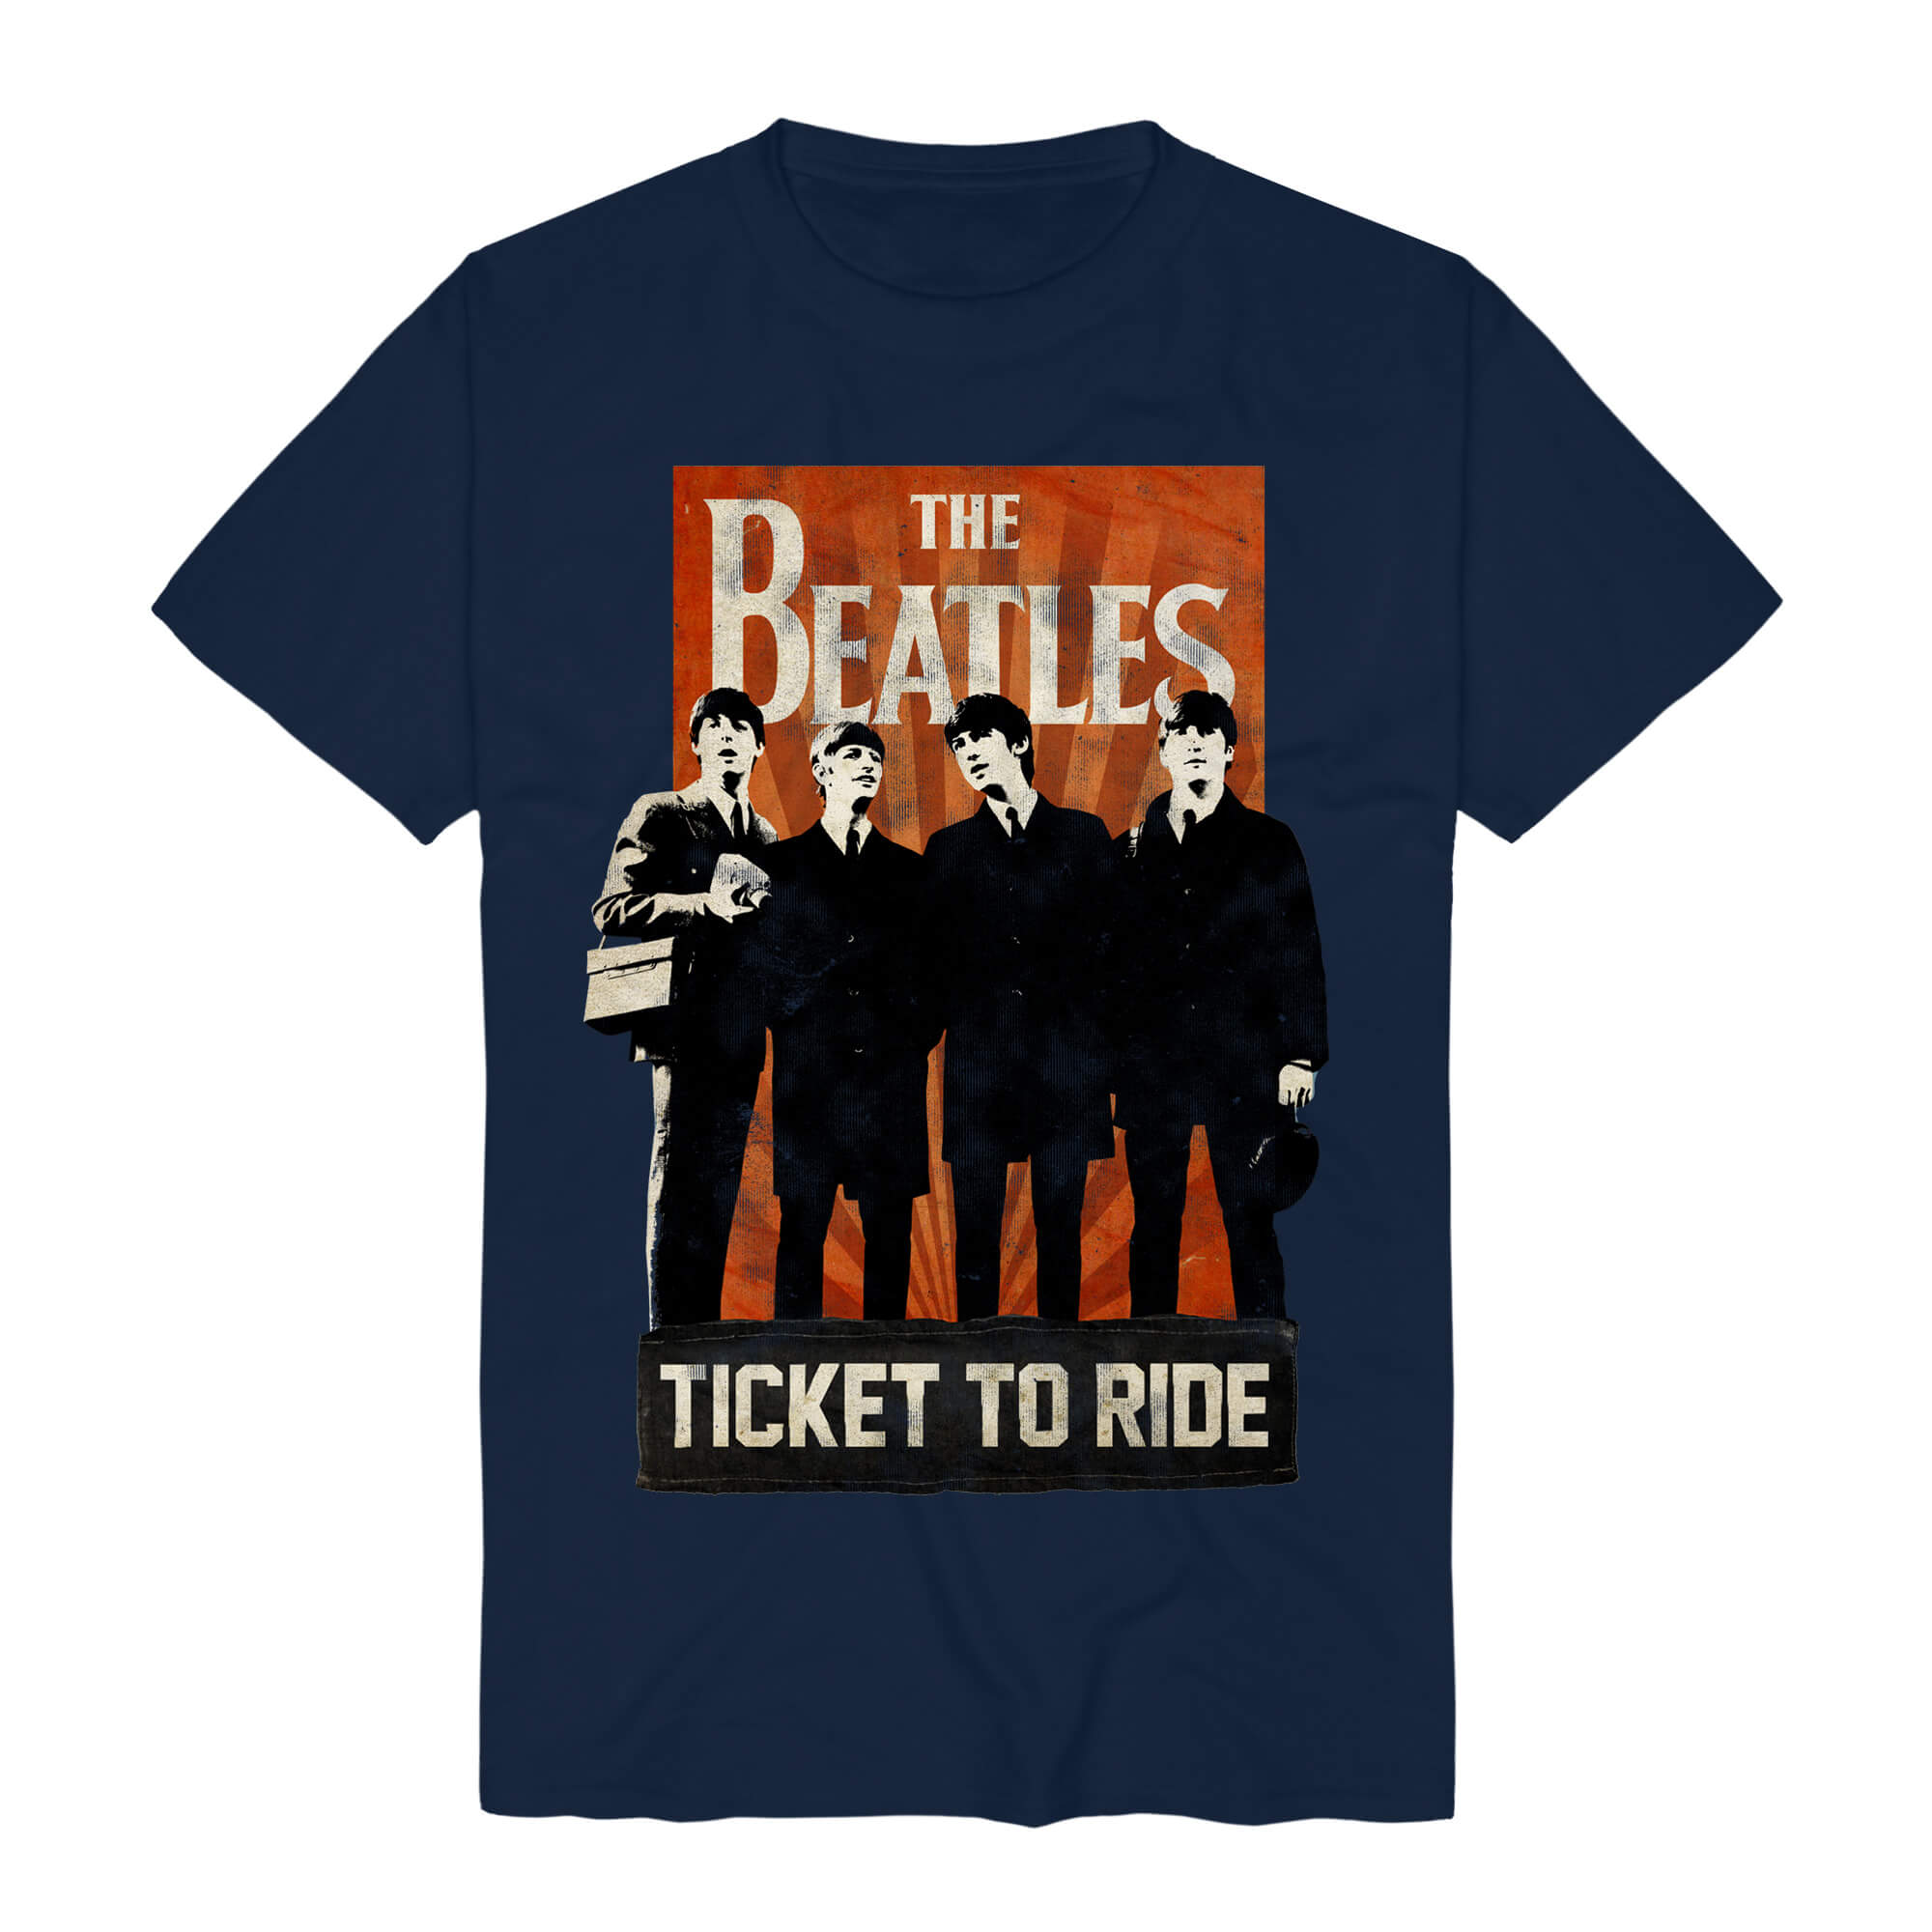 The Beatles - Ticket To Ride (Large)